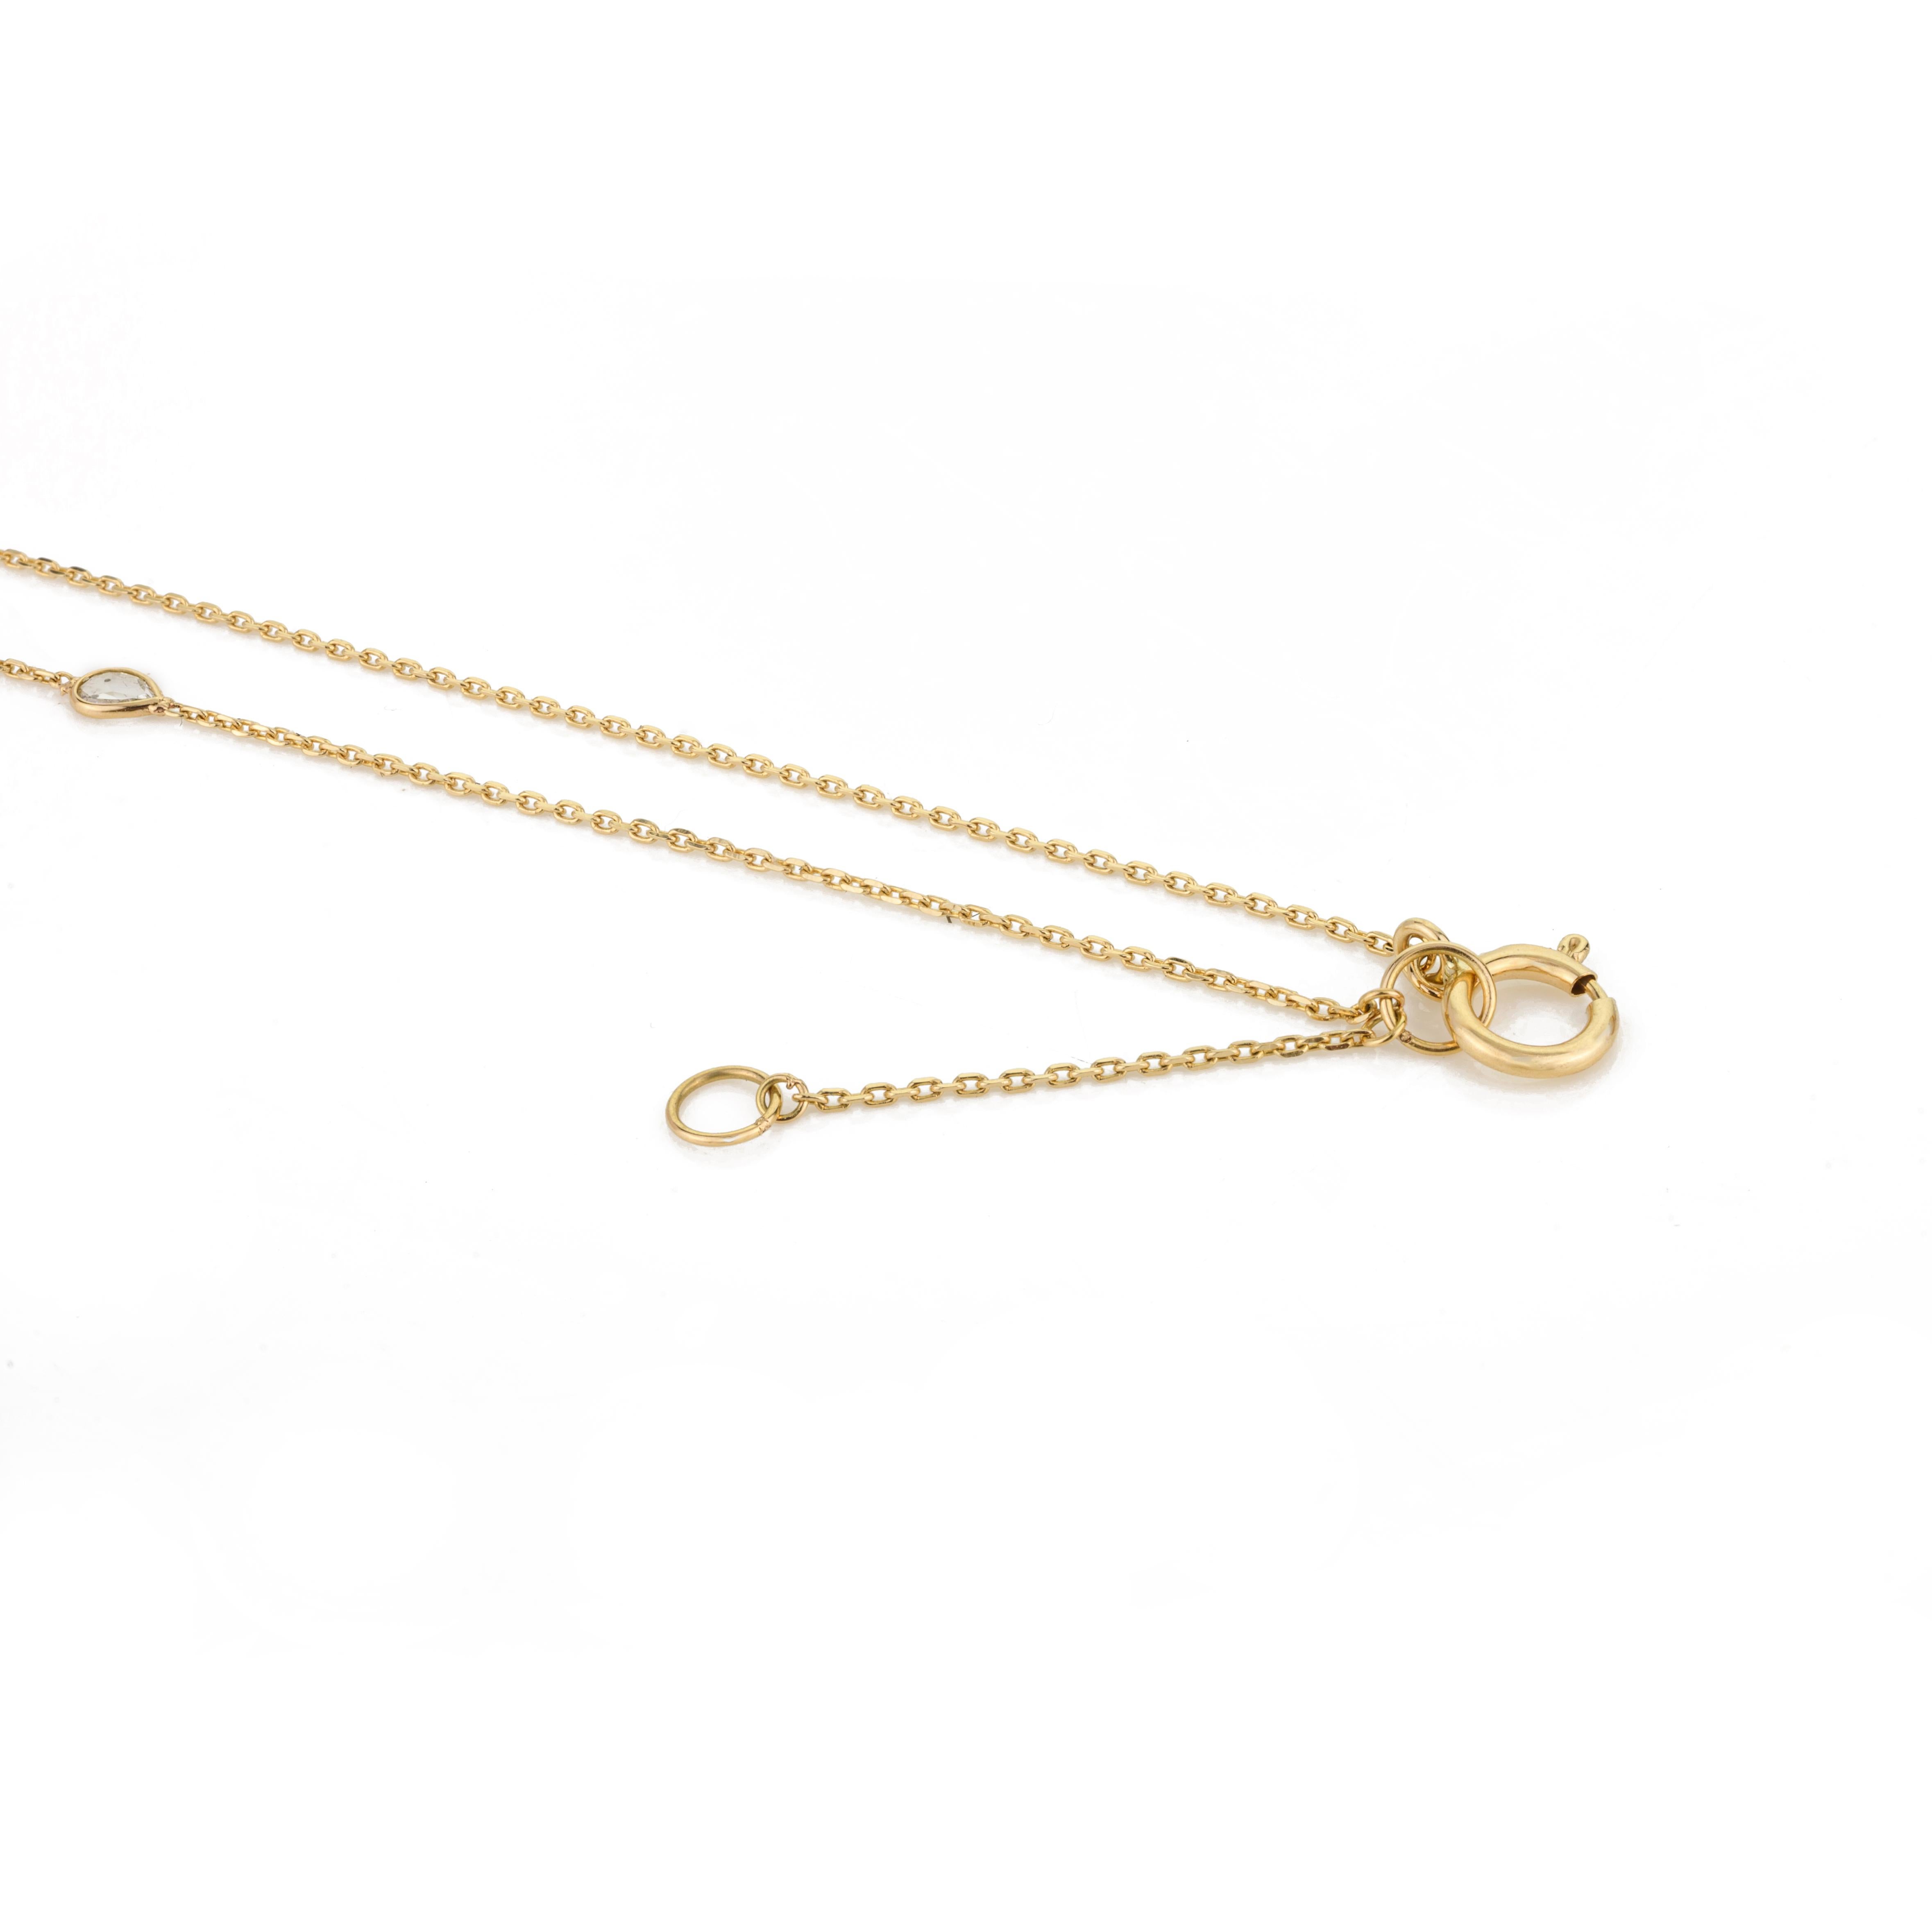 Women's Natural Uncut Diamond Necklace Crafted in 18 Karat Solid Yellow Gold for Her For Sale